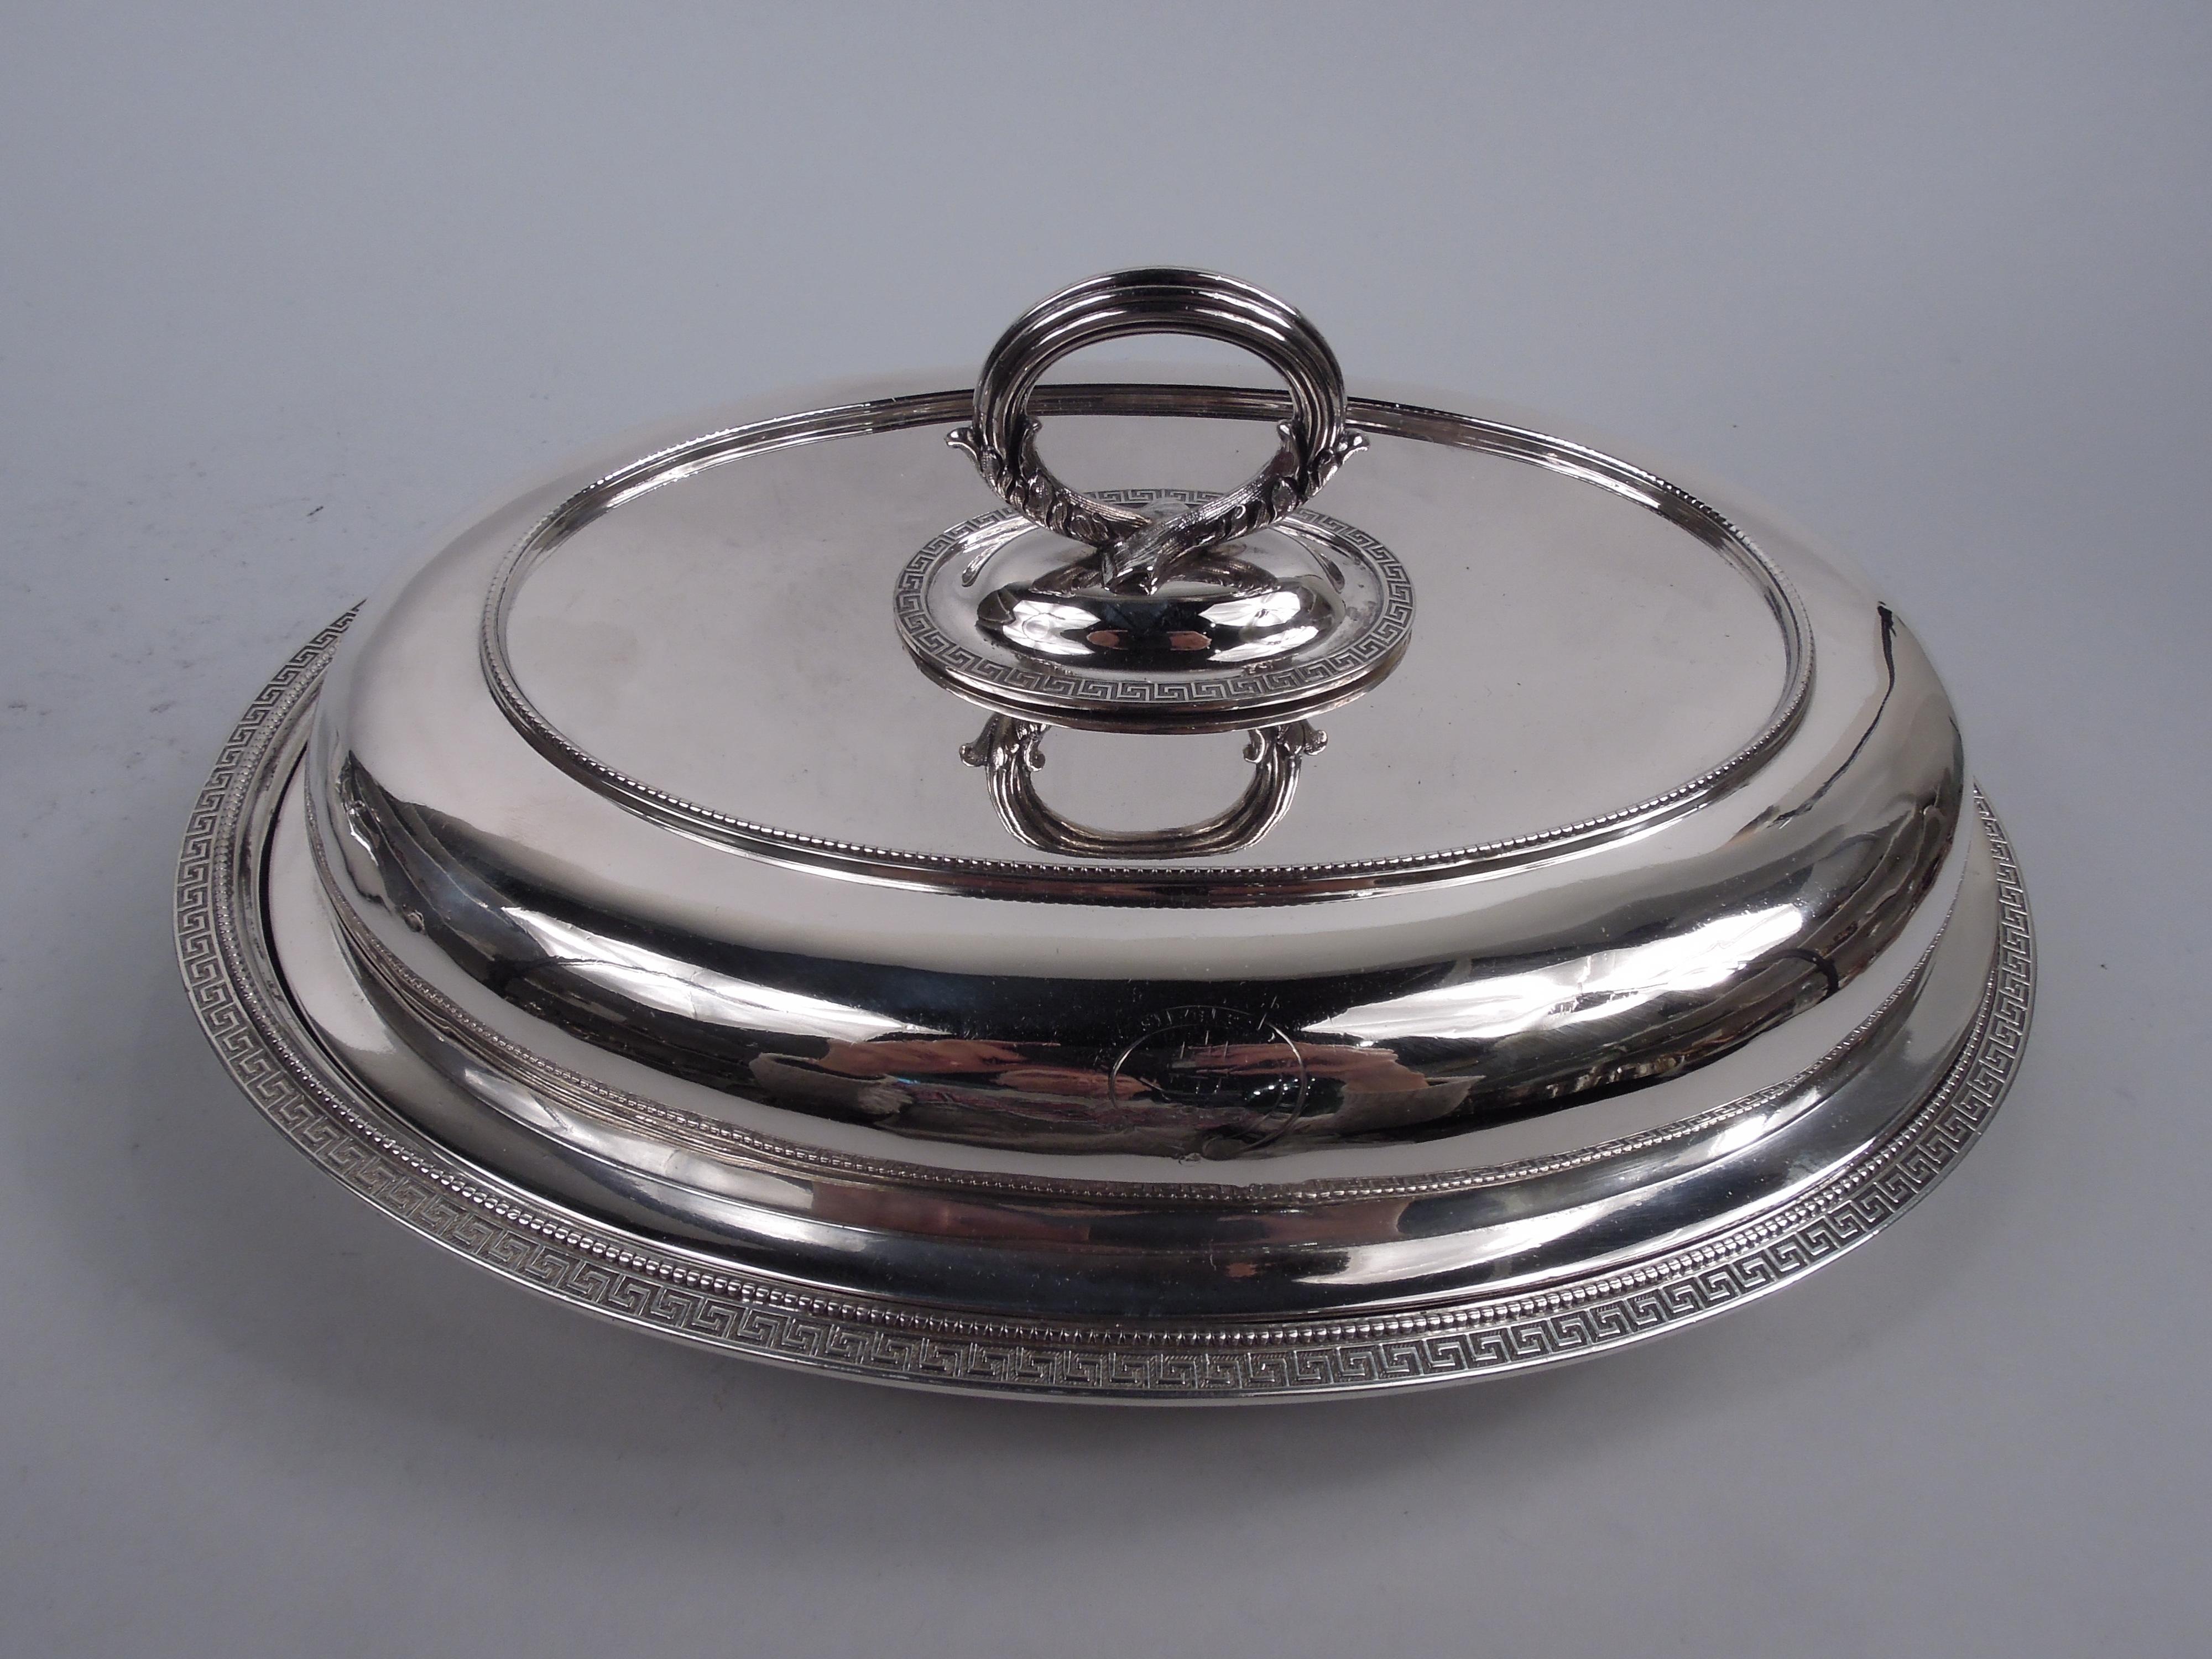 Pair of early Etruscan sterling silver covered serving dishes. Made by Moore for Tiffany & Co. at 550 Broadway in New York. Each: Oval bowl with everted rim. Cover domed; top has cast leaf-wrapped and reeded twist-lock ring handle for converting to